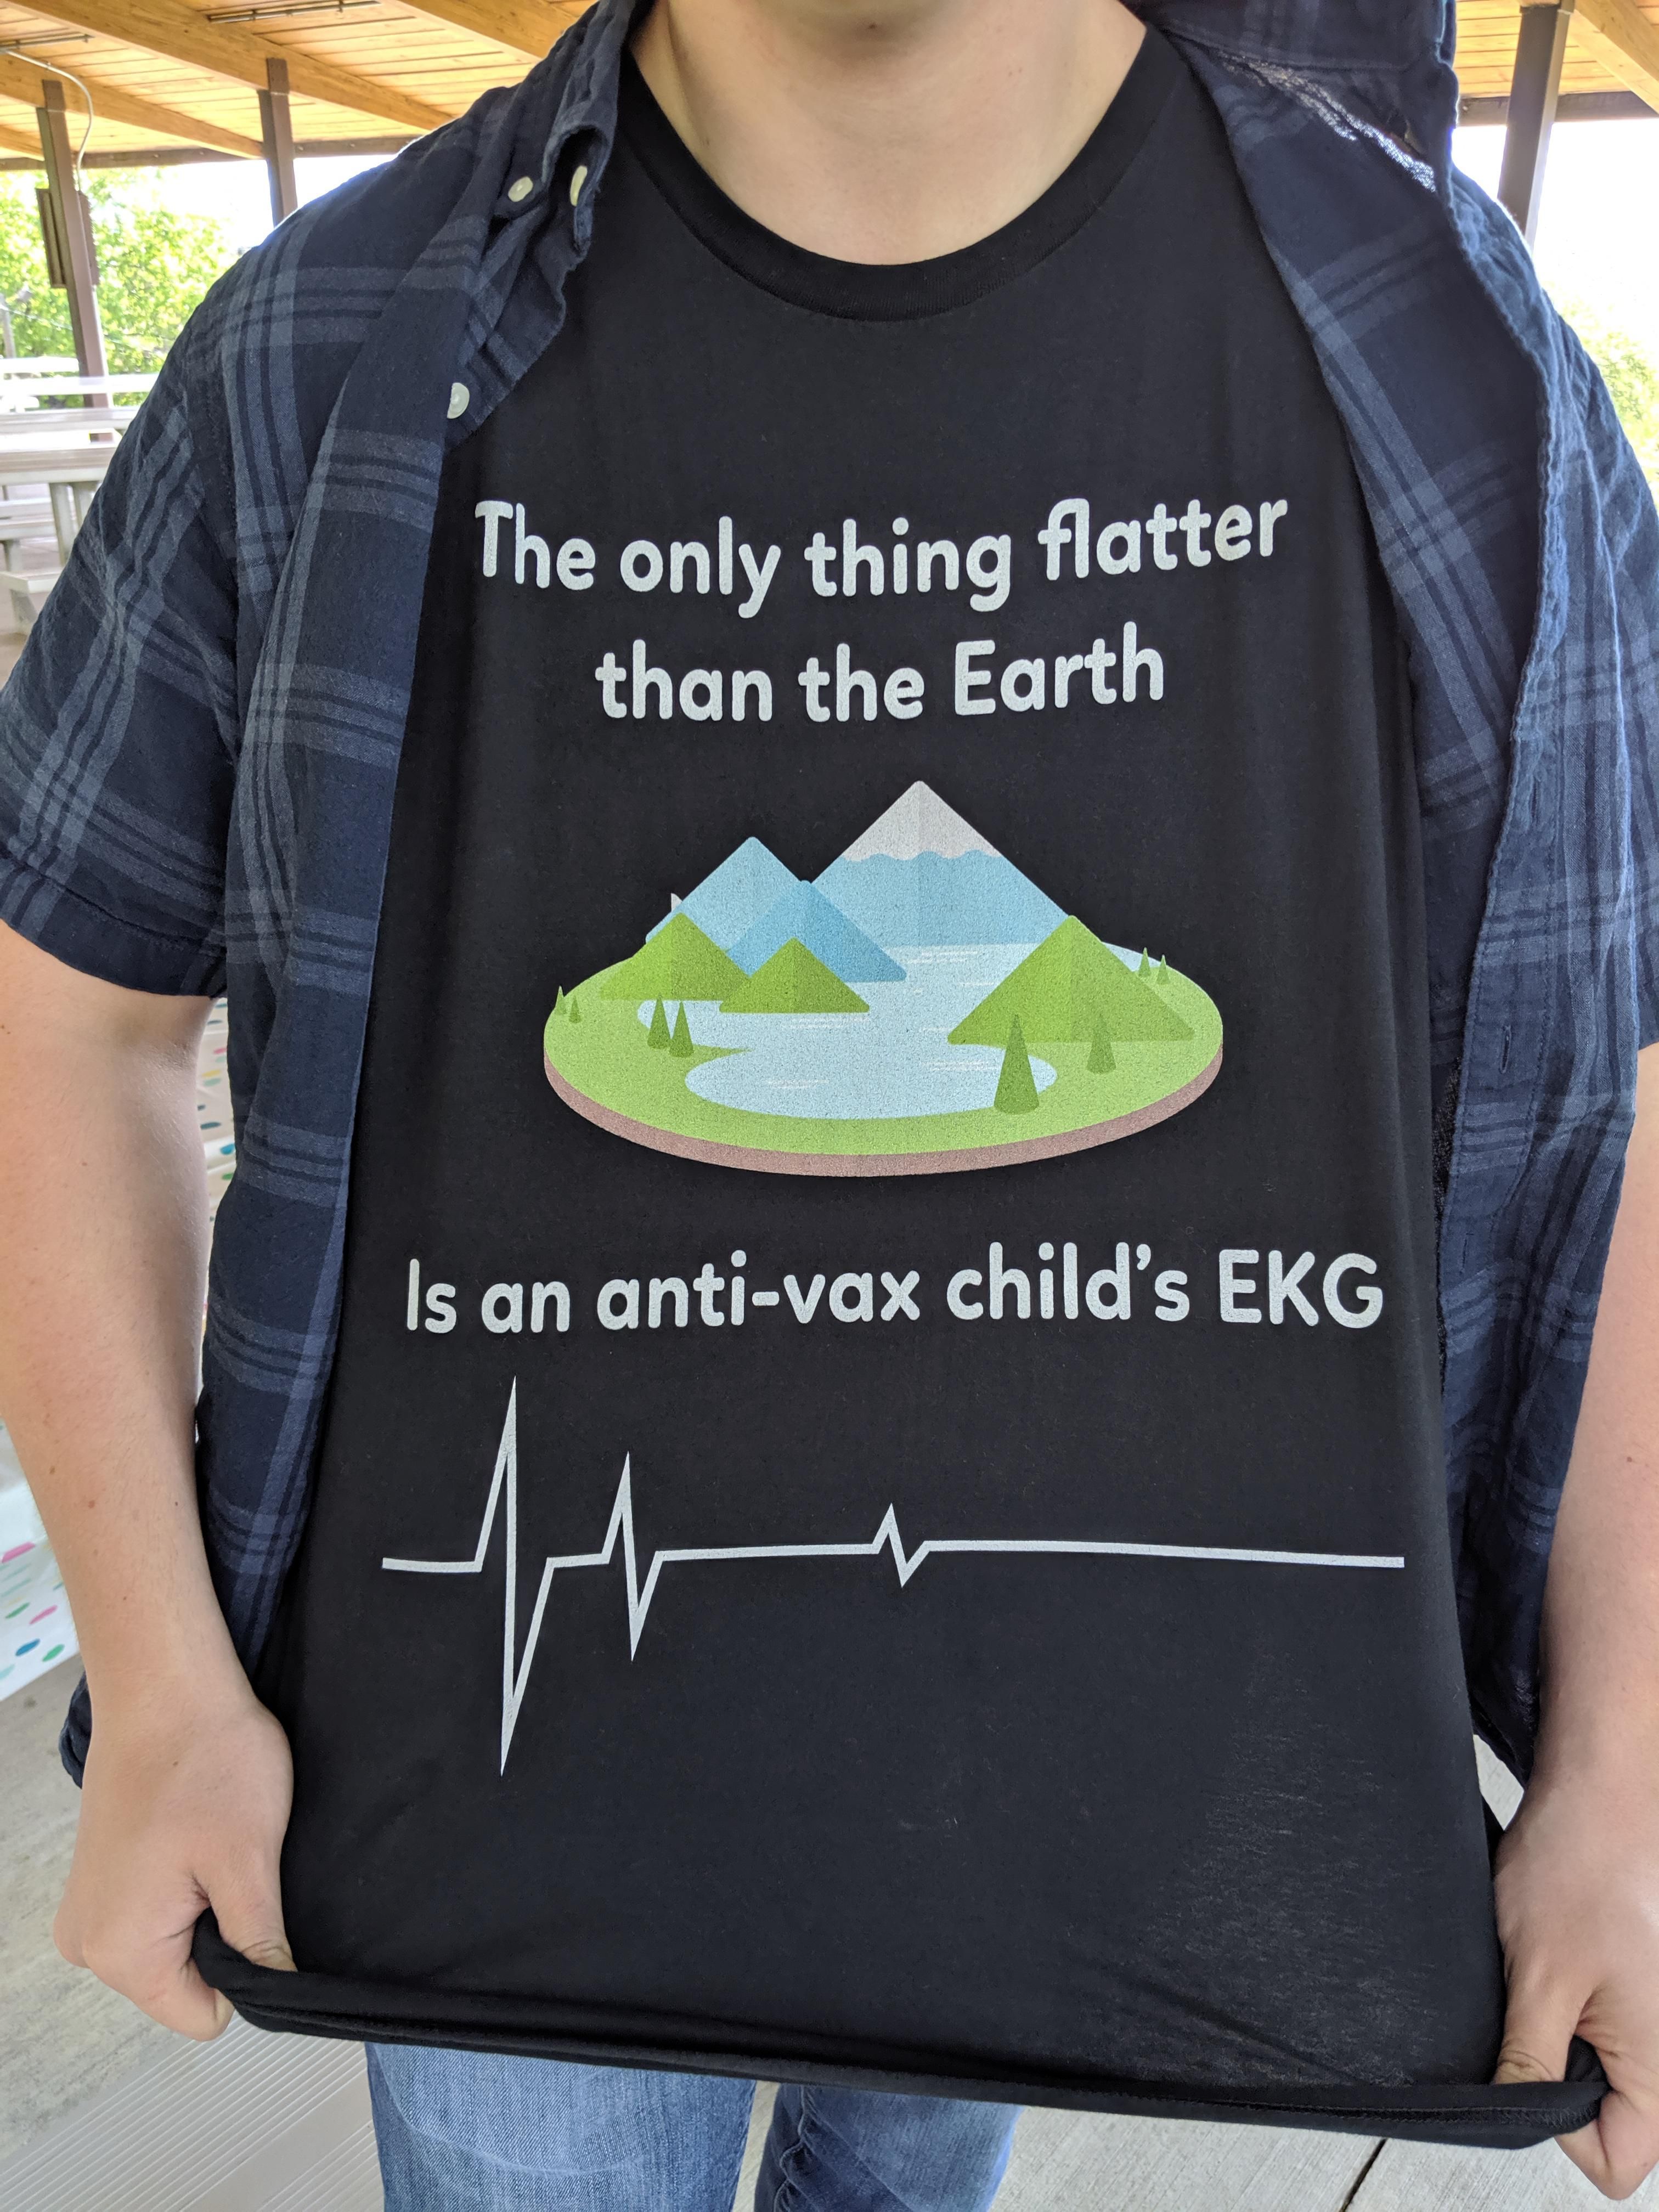 Nephew's shirt at family party. I died. But not literally, because I'm vaccinated.